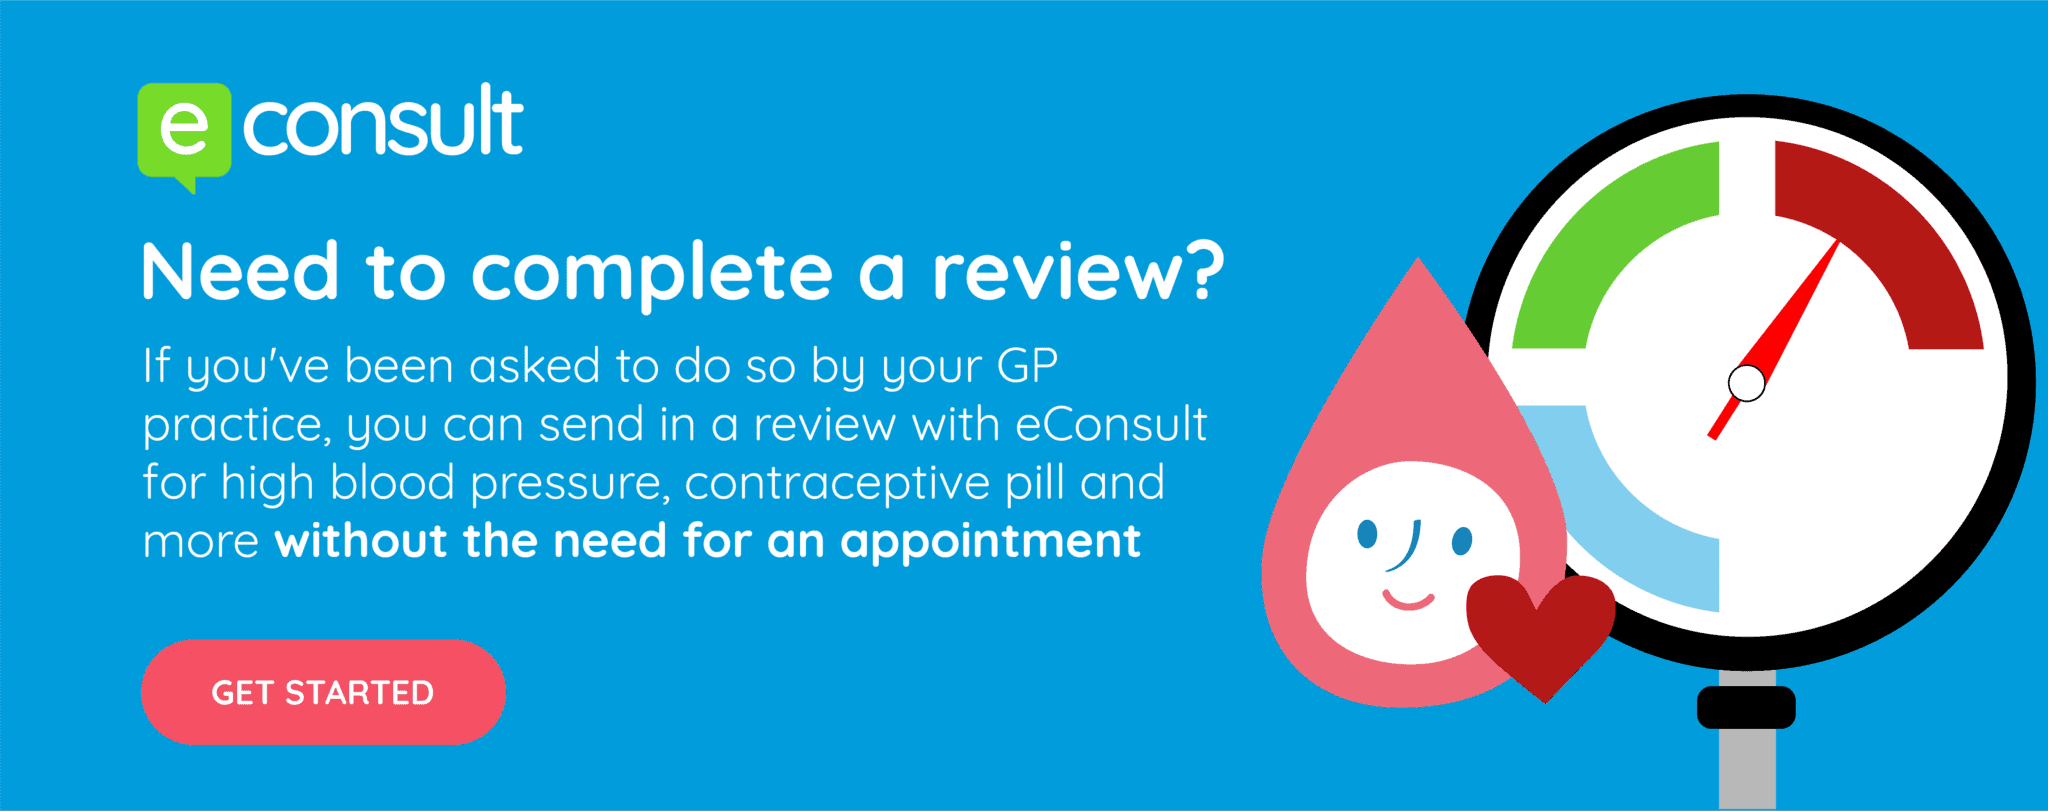 Need to complete a review?